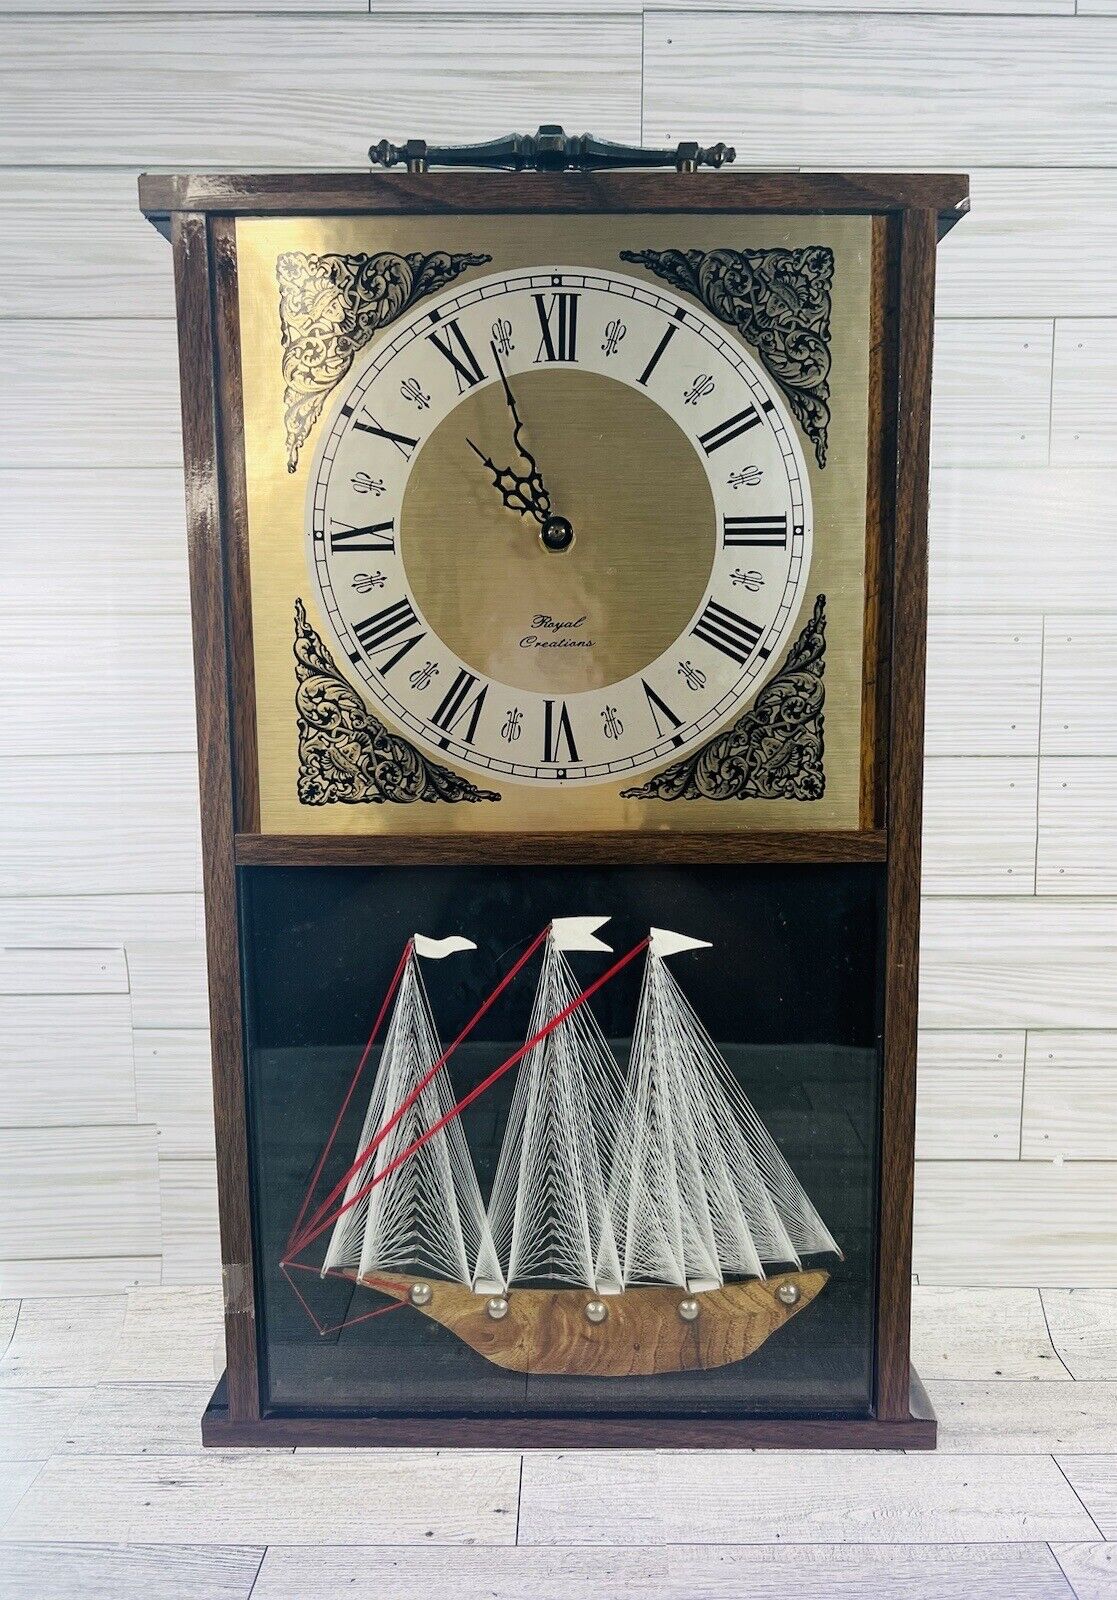 Royal Creations Vintage Electrical Clock With Handmade Ship On Display 